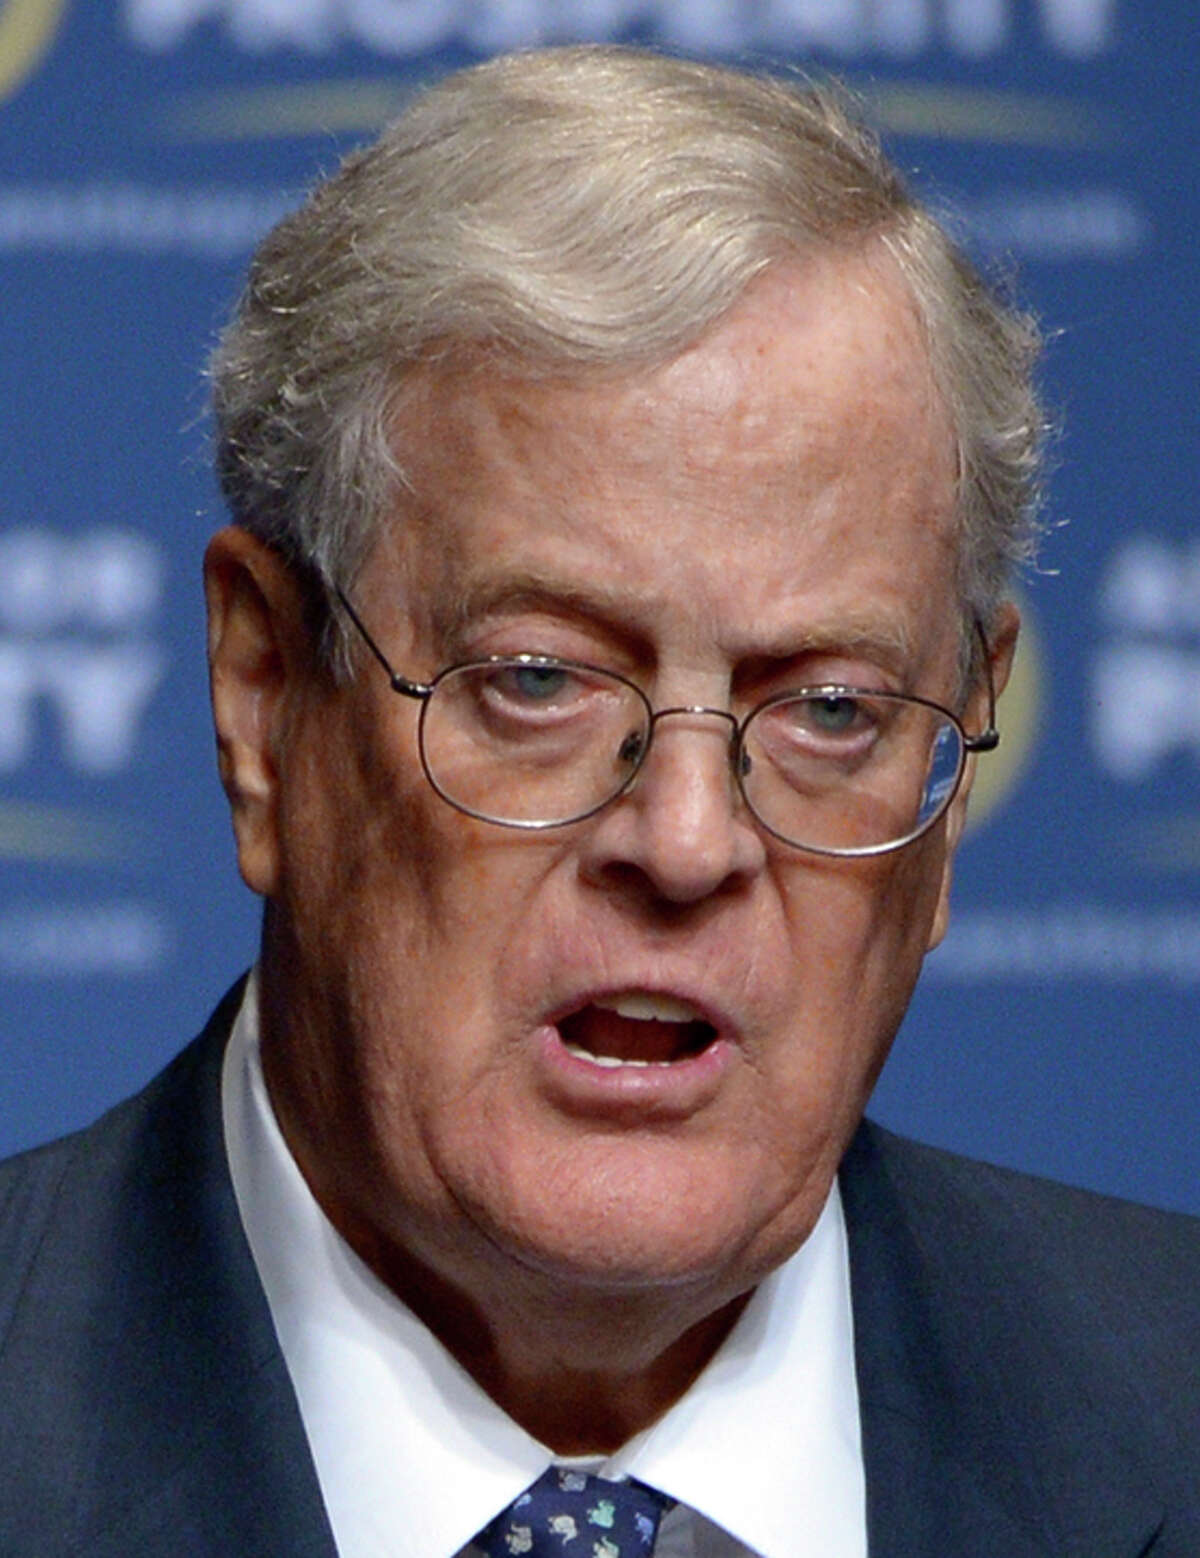 David Koch and his brother held a winter retreat for GOP hopefuls.